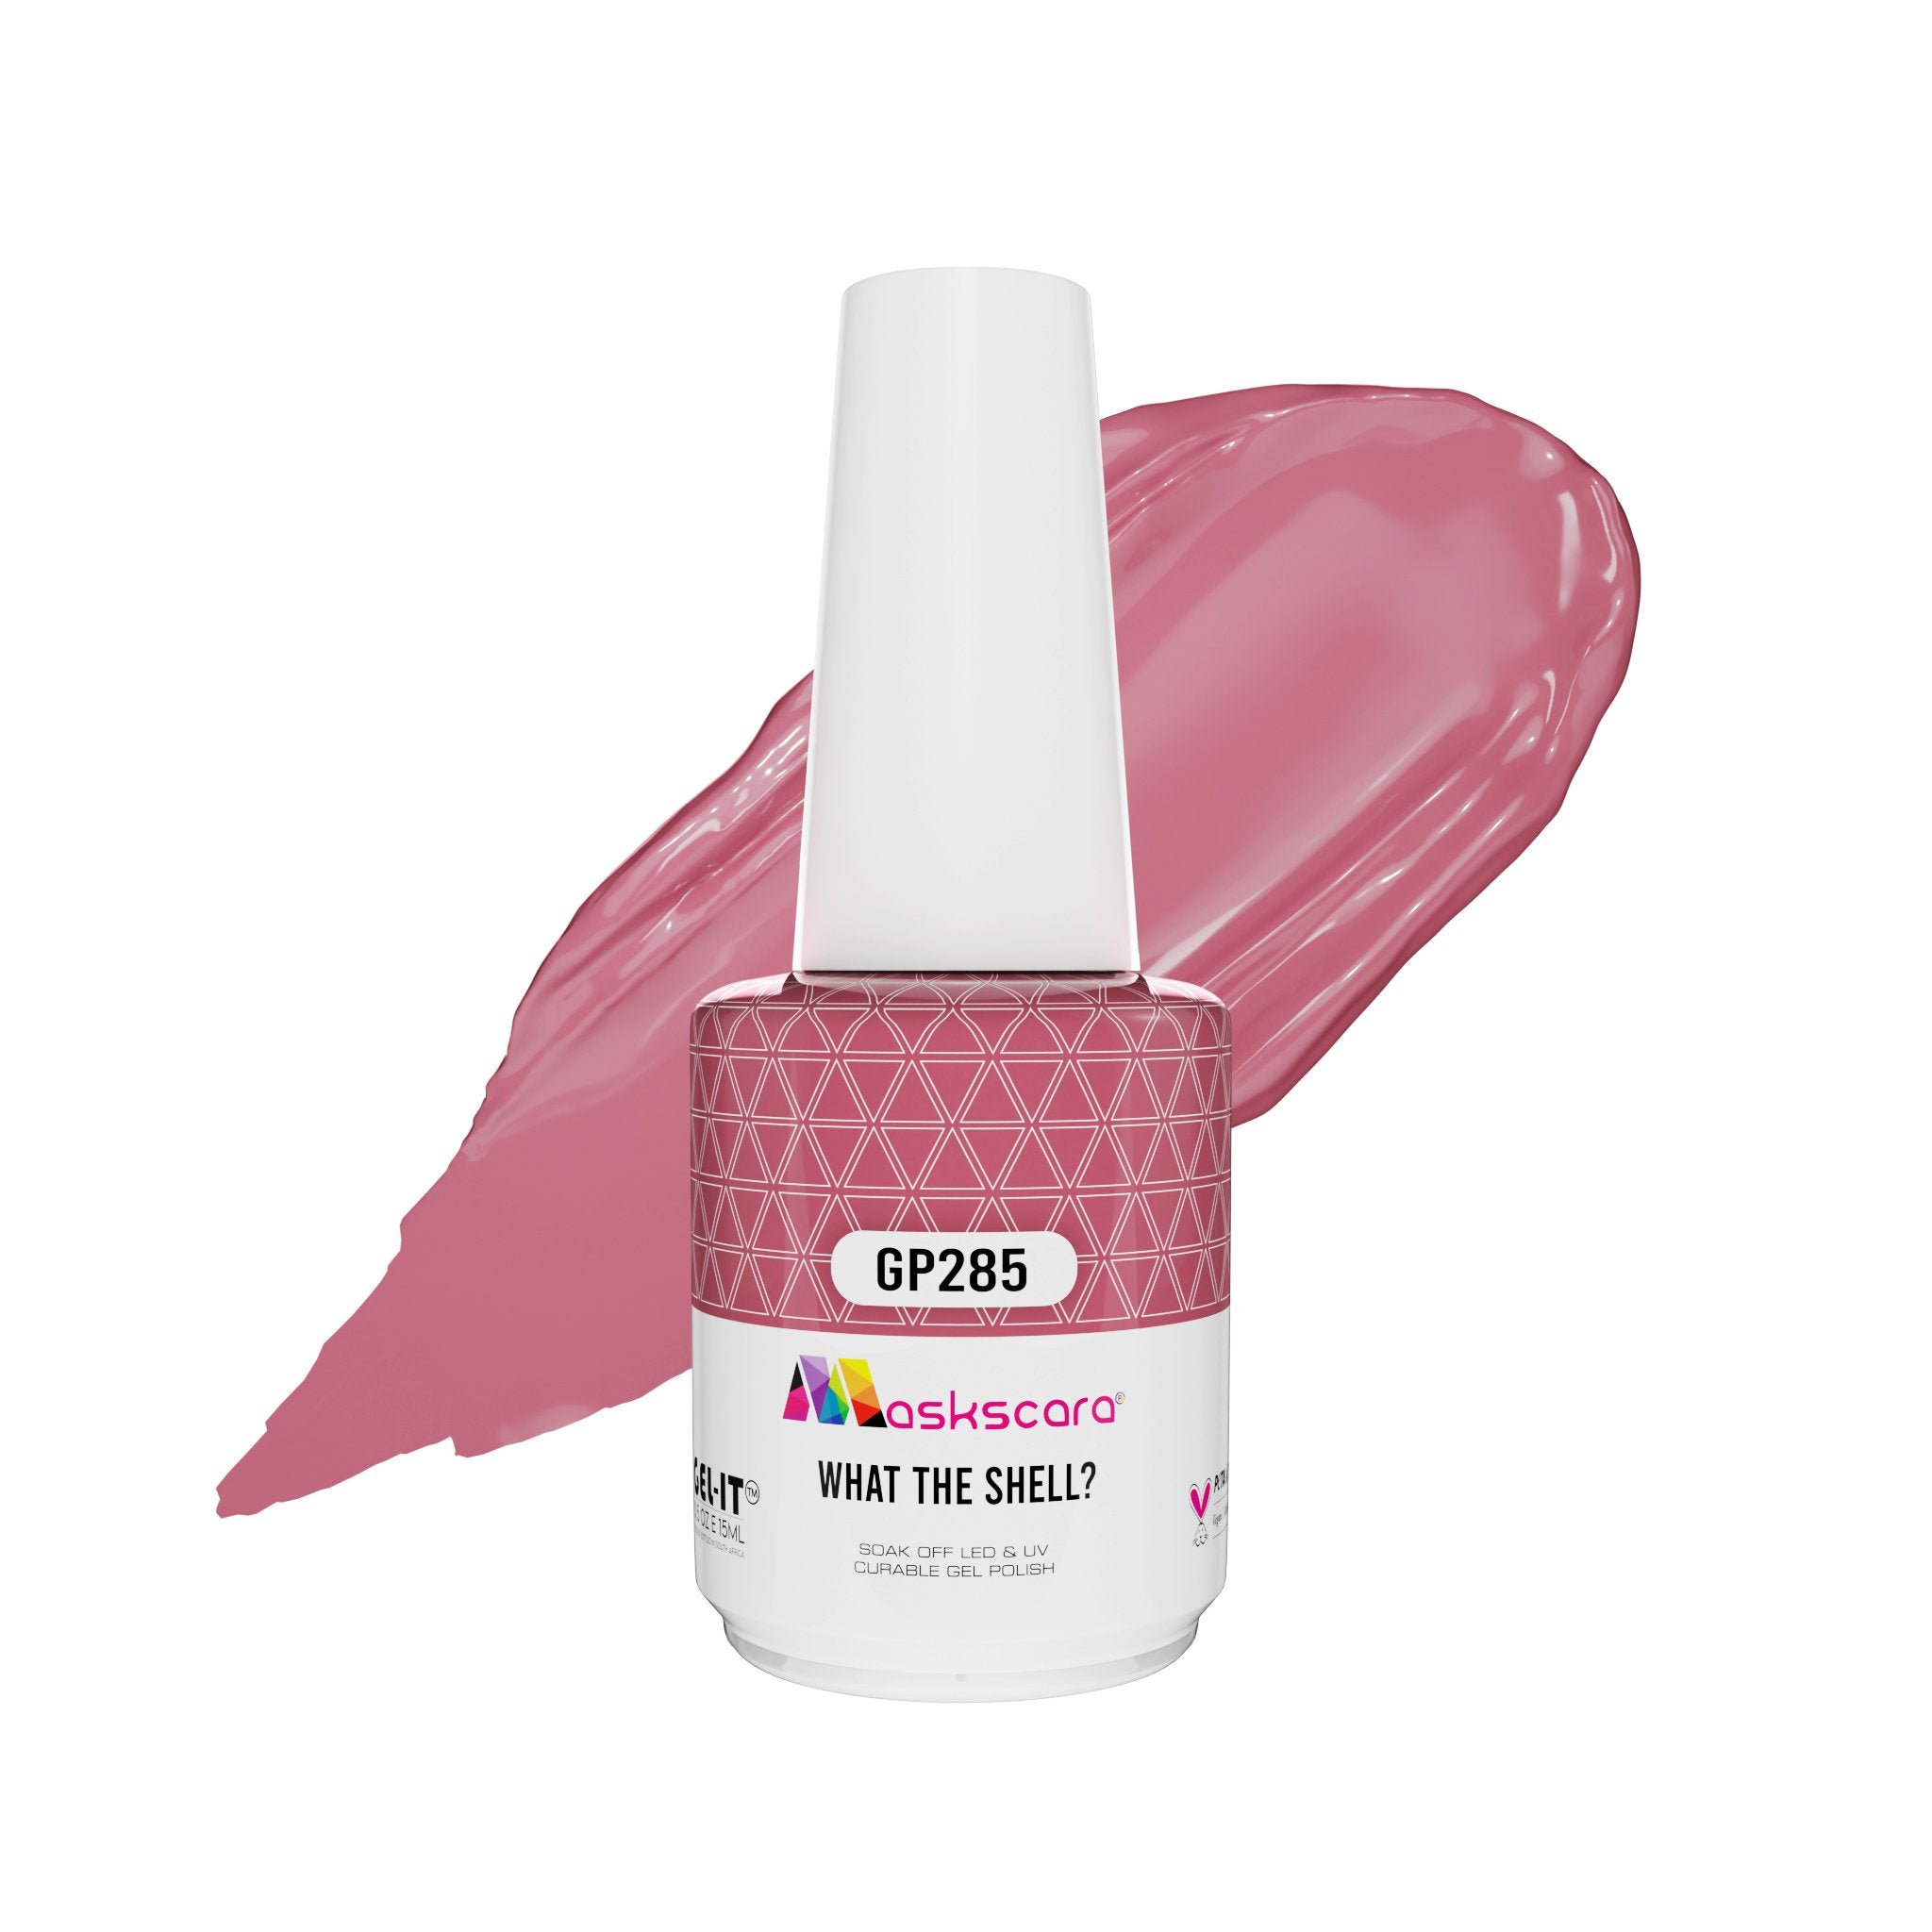 <img scr = “ GP285 What The Shell?.jpeg” alt = “Berry Nude gel polish colour by the brand Maskscara”>